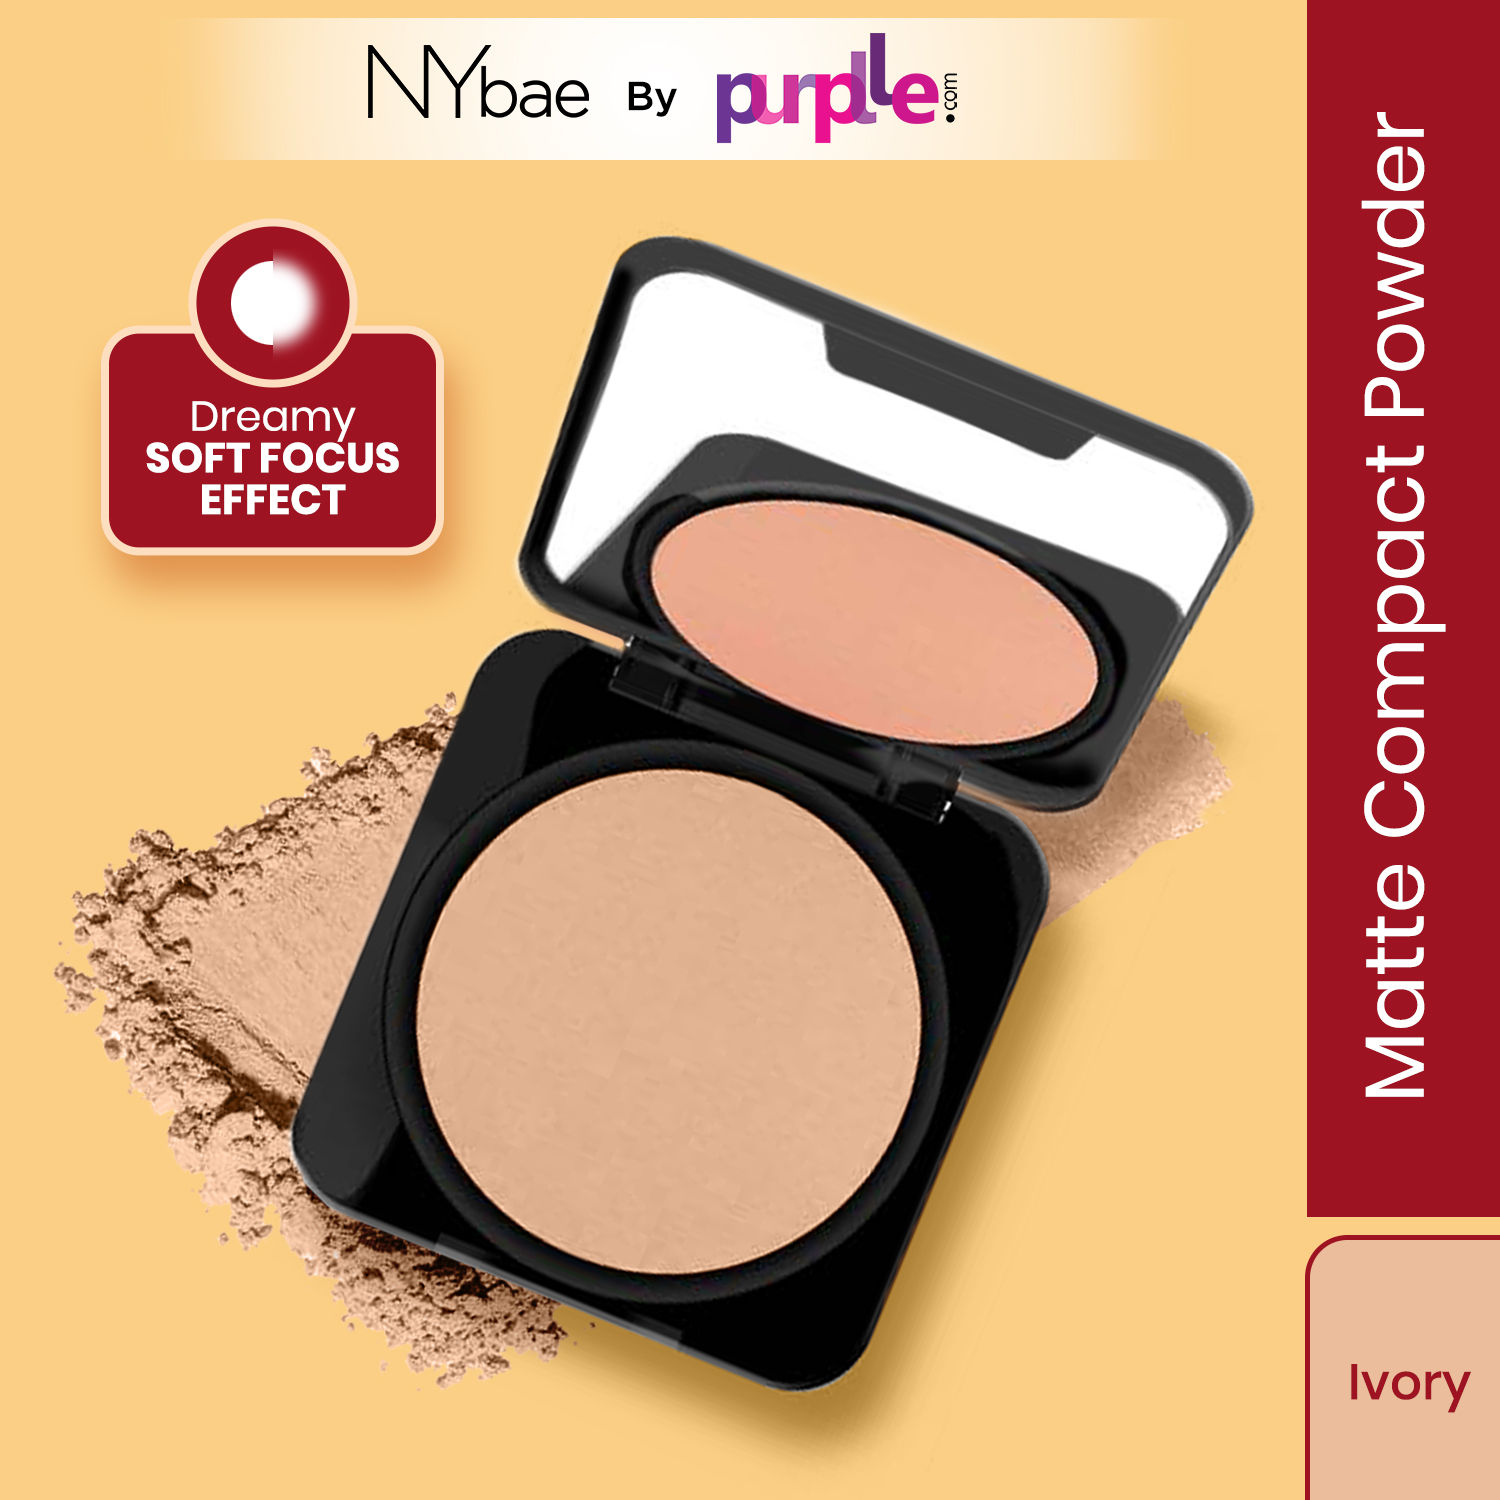 Buy NY Bae Runway Radiance Compact Powder - Pale Ivory 01 (9 g) | Fair Skin | Matte Finish | Rich Colour | Blurs Imperfections | Long Wearing - Purplle